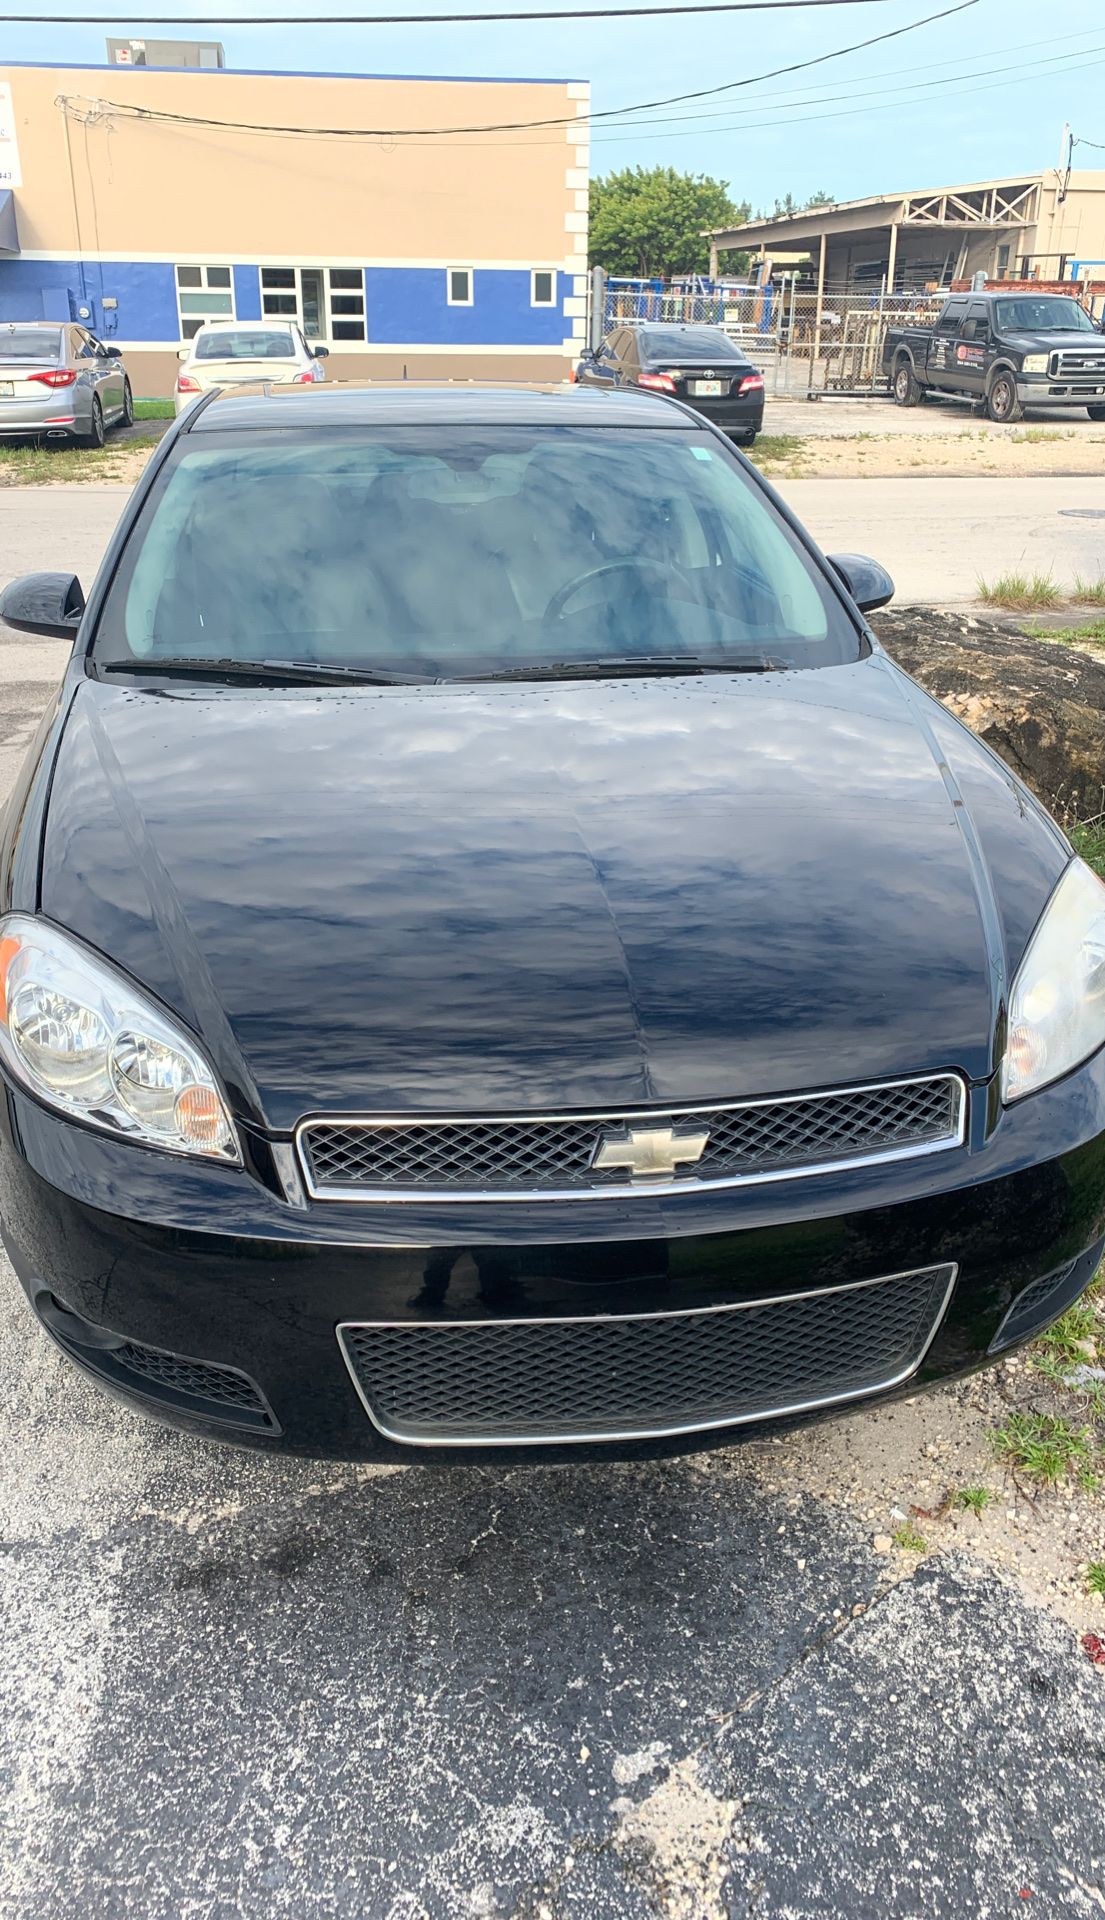 2007 Chevy impala for sale $5500 or obo. The car is very clean and reliable. Serious inquires only.